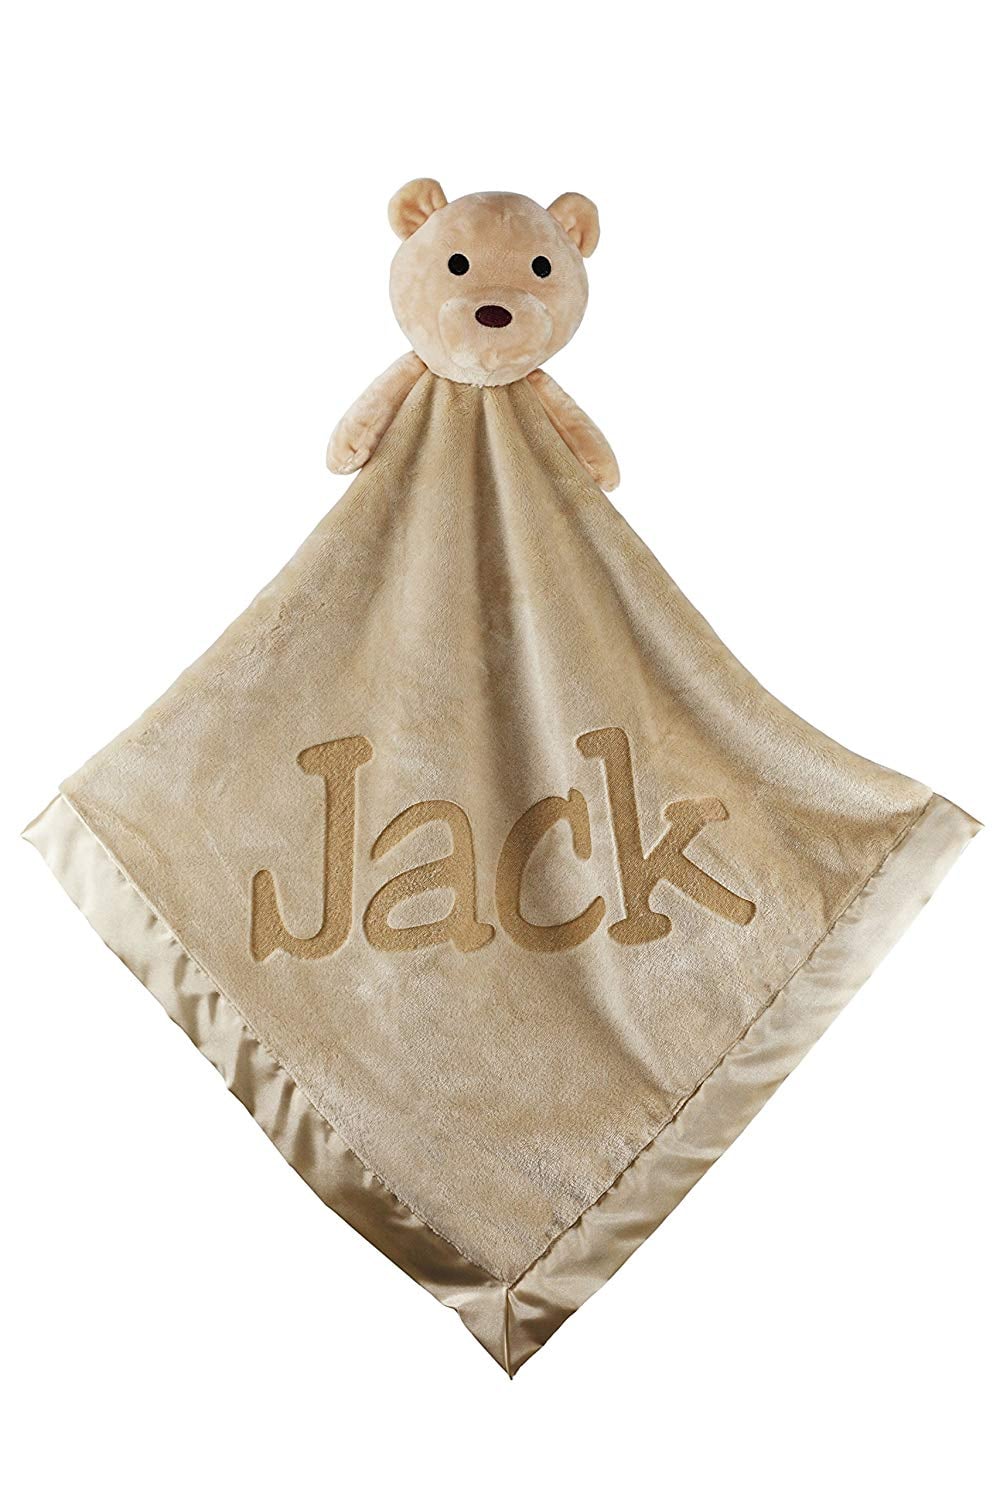 For Infants Plush Personalized Teddy Bear Blanket The Best Gifts For Kids Under 10 Years Old In 2019 POPSUGAR Family Photo 11